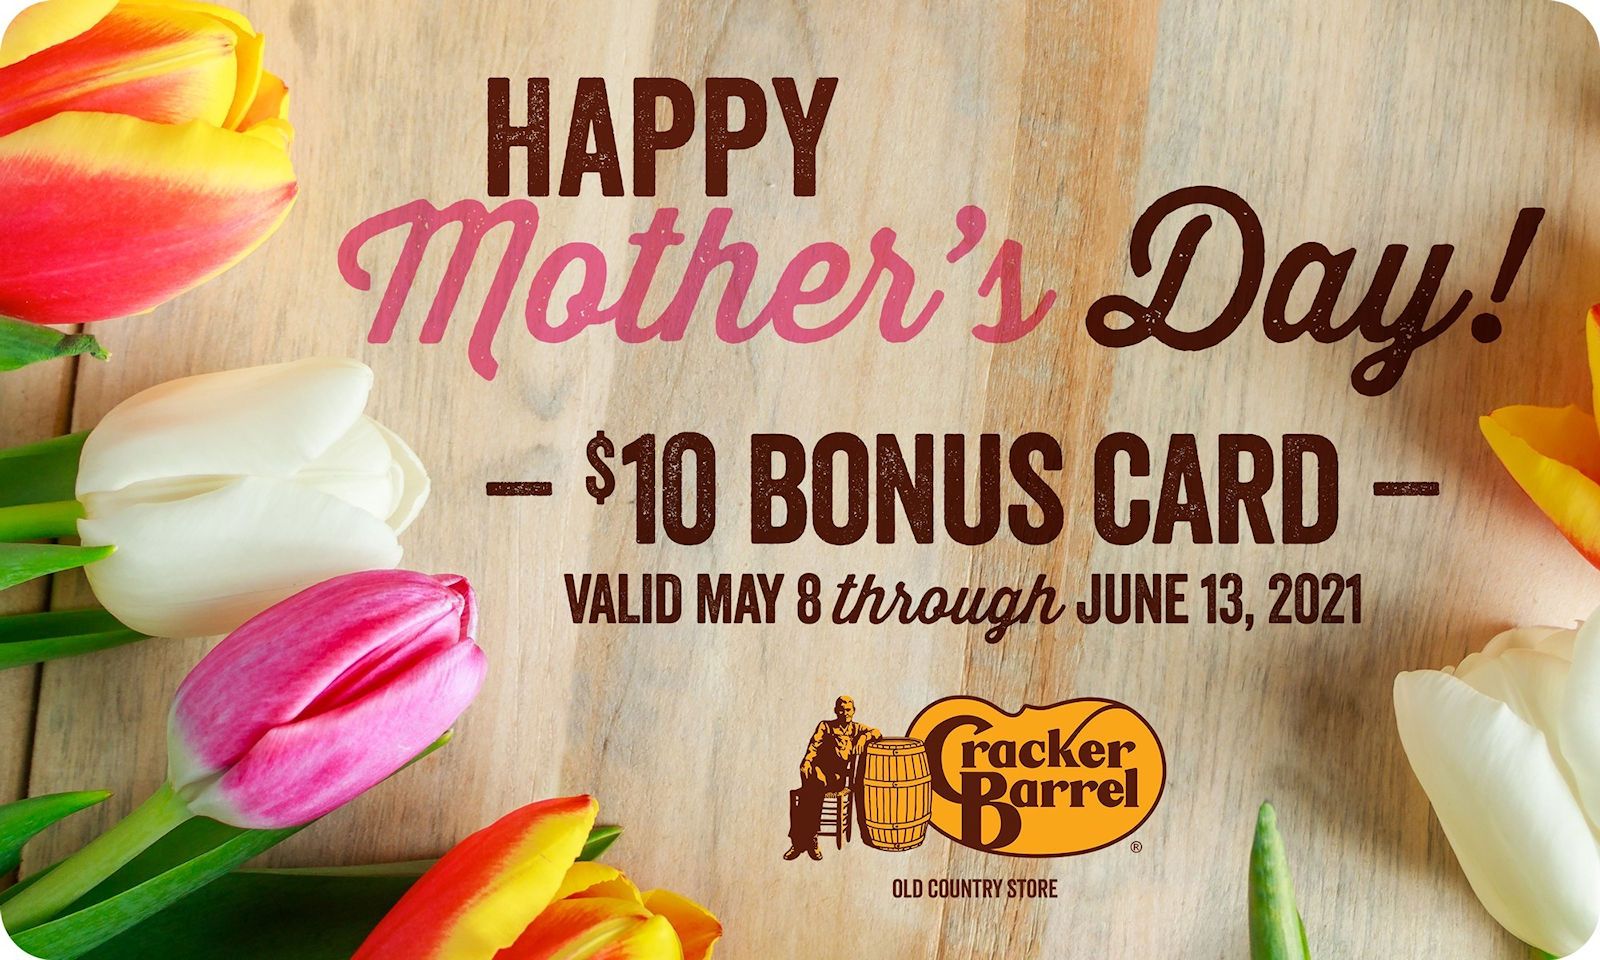 Cracker Barrel Old Country Store Launches New Homestyle Favorites Crafted With Care Ahead of Mother's Day